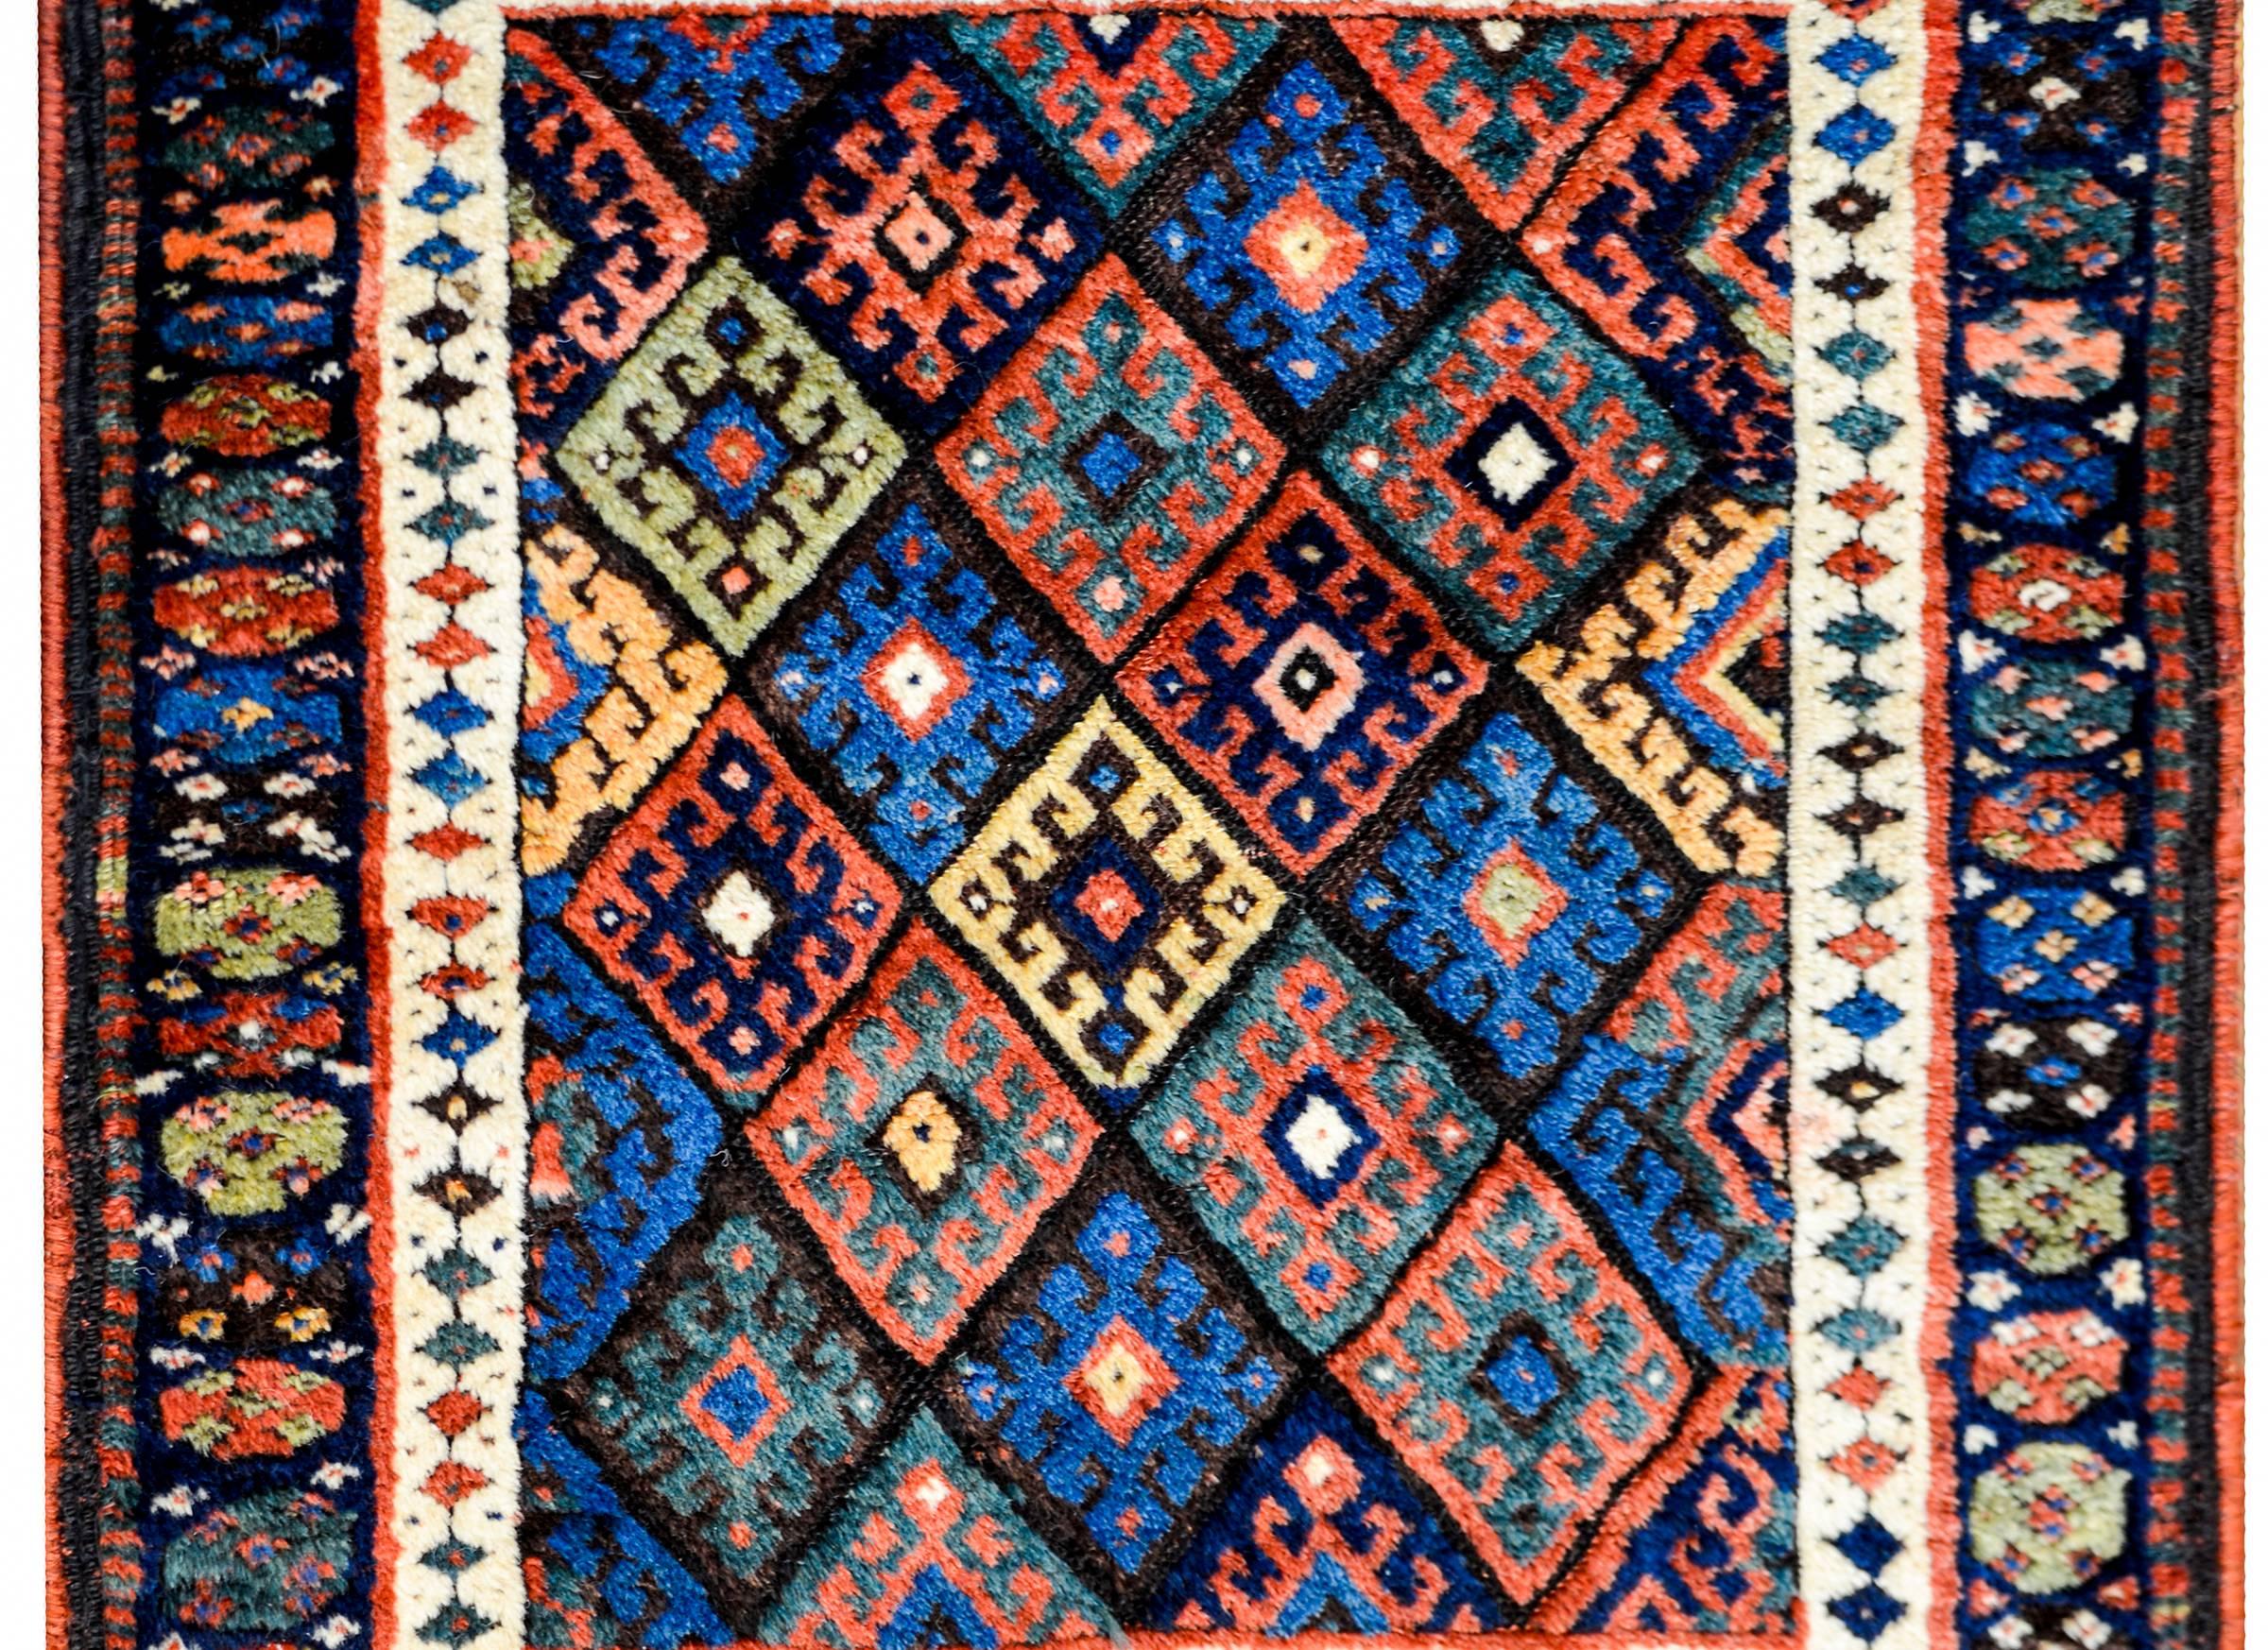 A wonderful early 20th century Kurdish Jaff rug with a complex pattern containing multiple diamonds with stylized flowers woven in crimson, indigo, green, black, and yellow colored wool. The border is complex, with two wide stripes, one with a